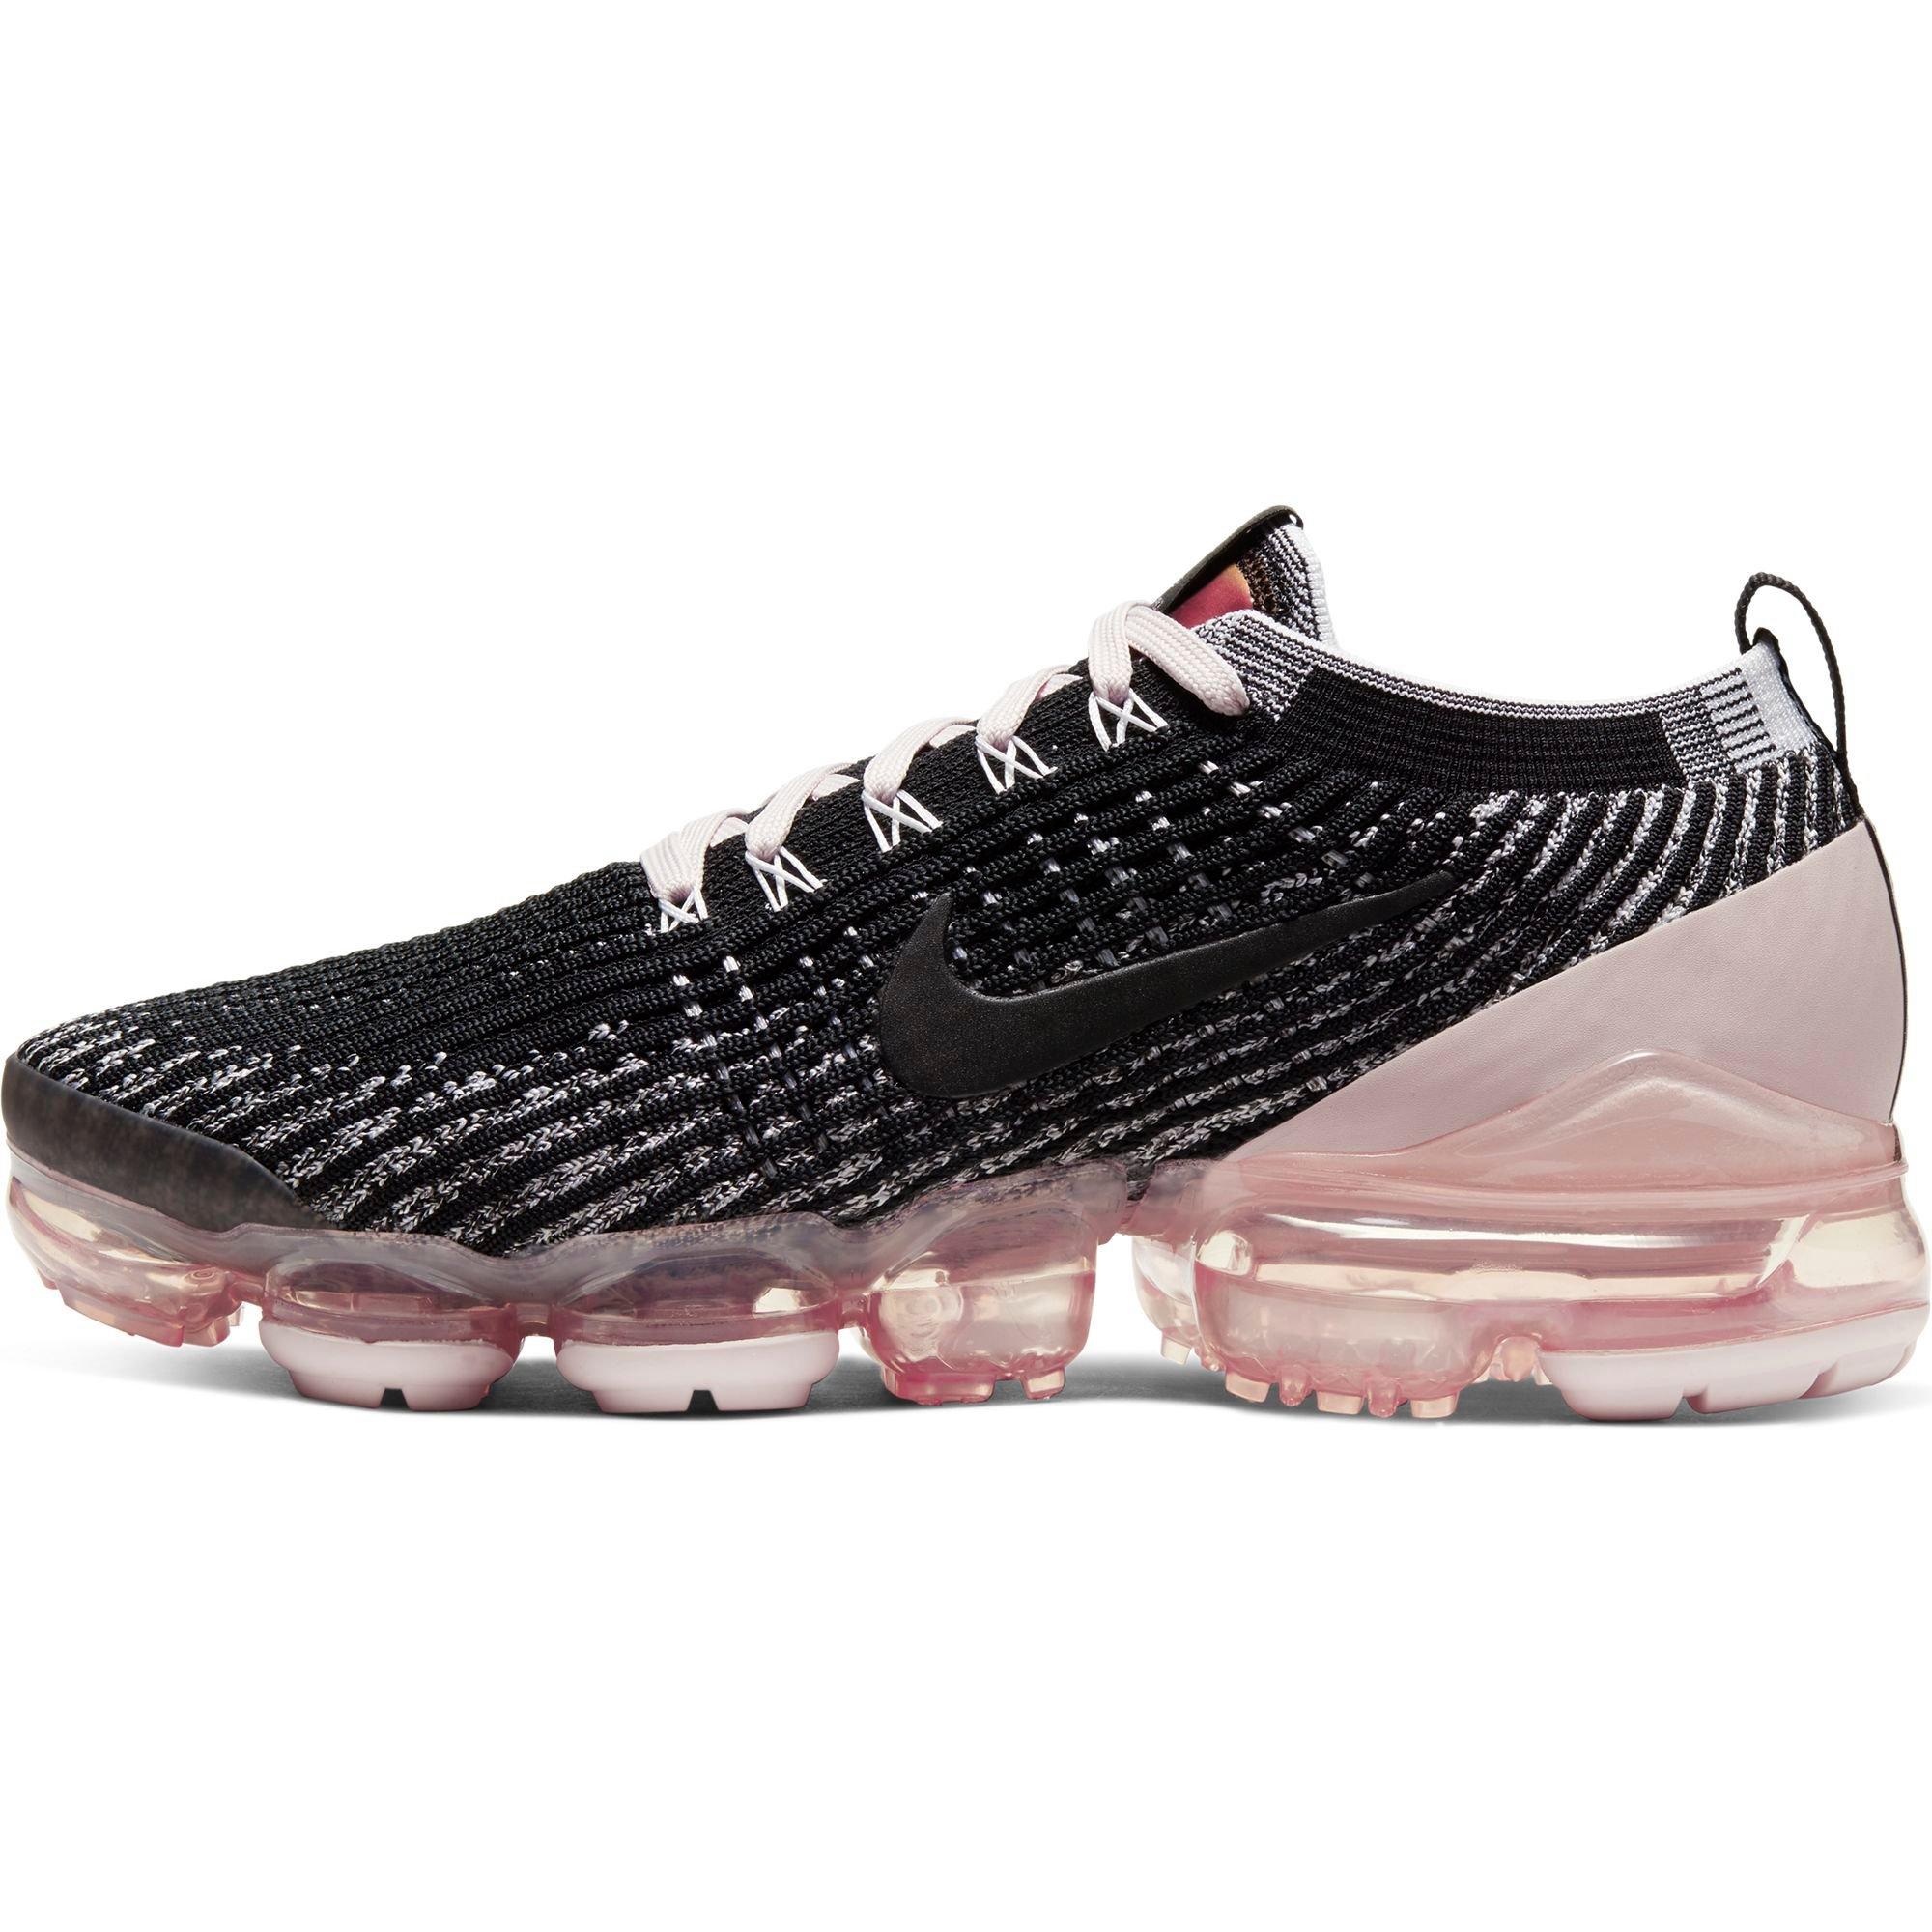 nike running vapormax flyknit trainers in black and pink